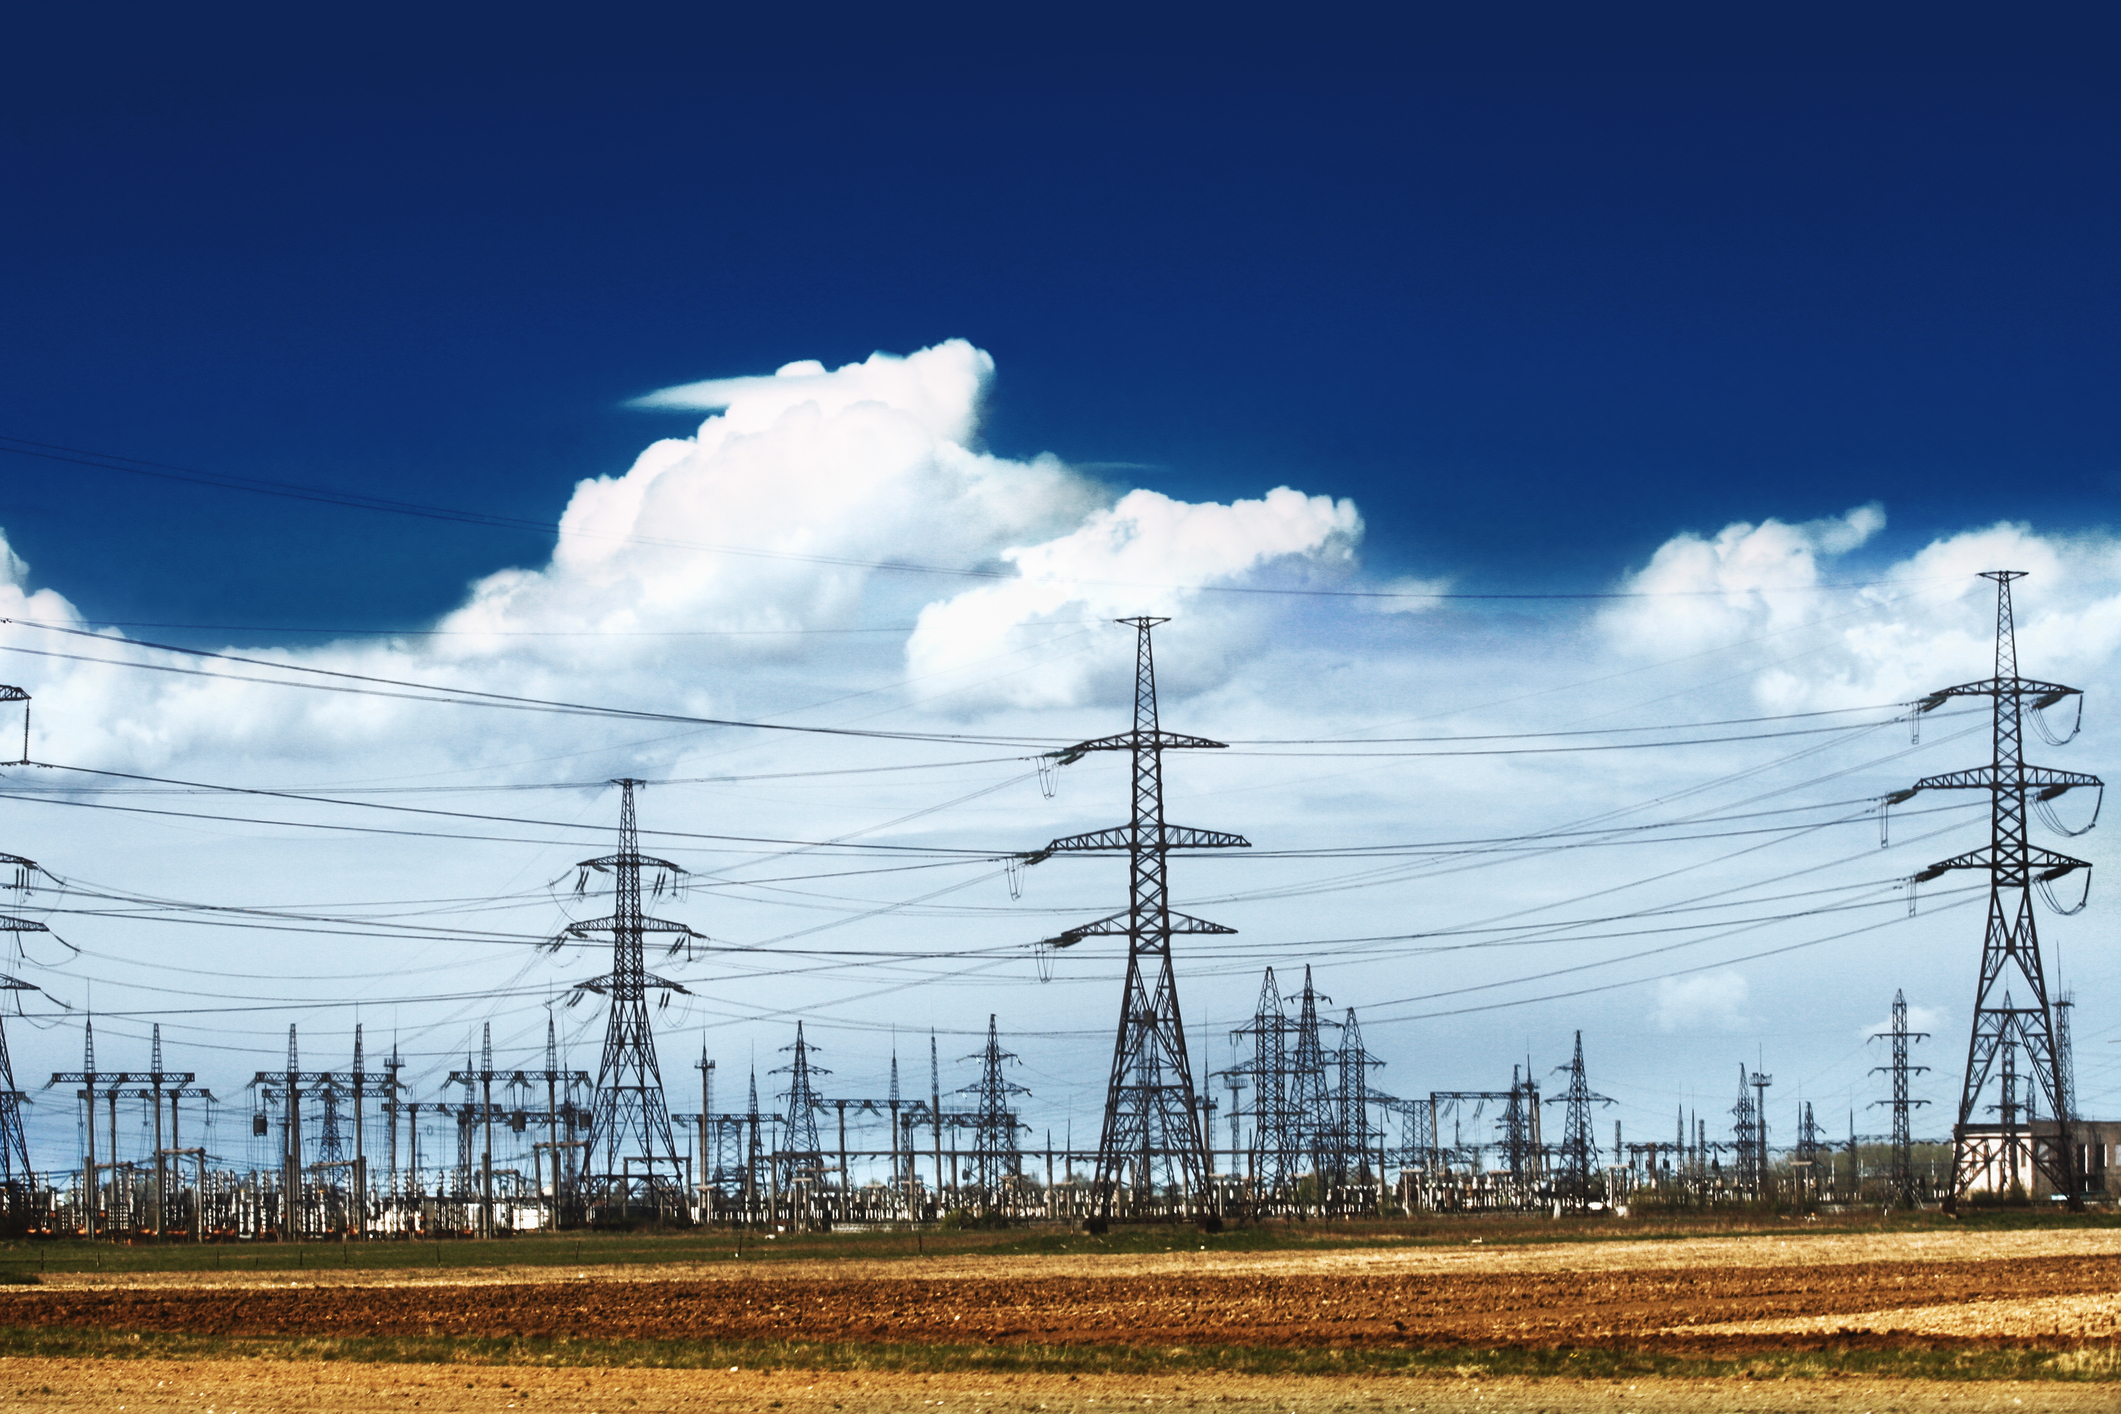 IoT and low power unite to benefit utility companies